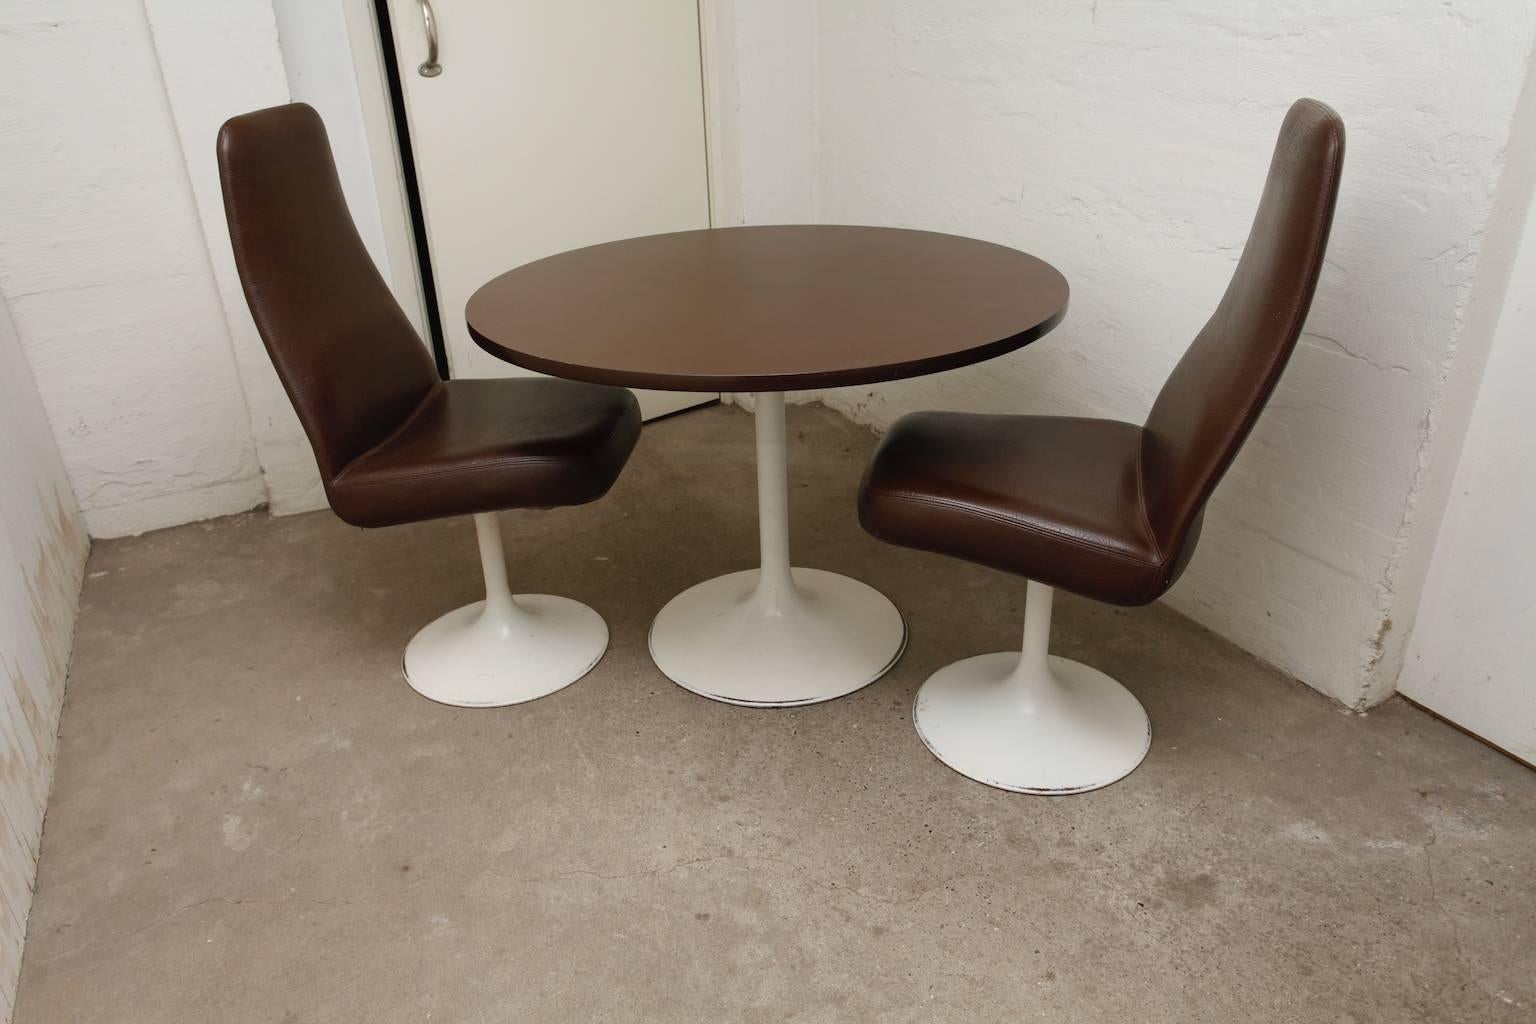 Two cool chairs with matching table and tulip foot by Johanson Design, Sweden, 1970s. This epitomizes Swedish hip design of the 1970s.
Johanson Design in Markaryd Sweden was a big producer of very cool furniture.
The chairs is in very good